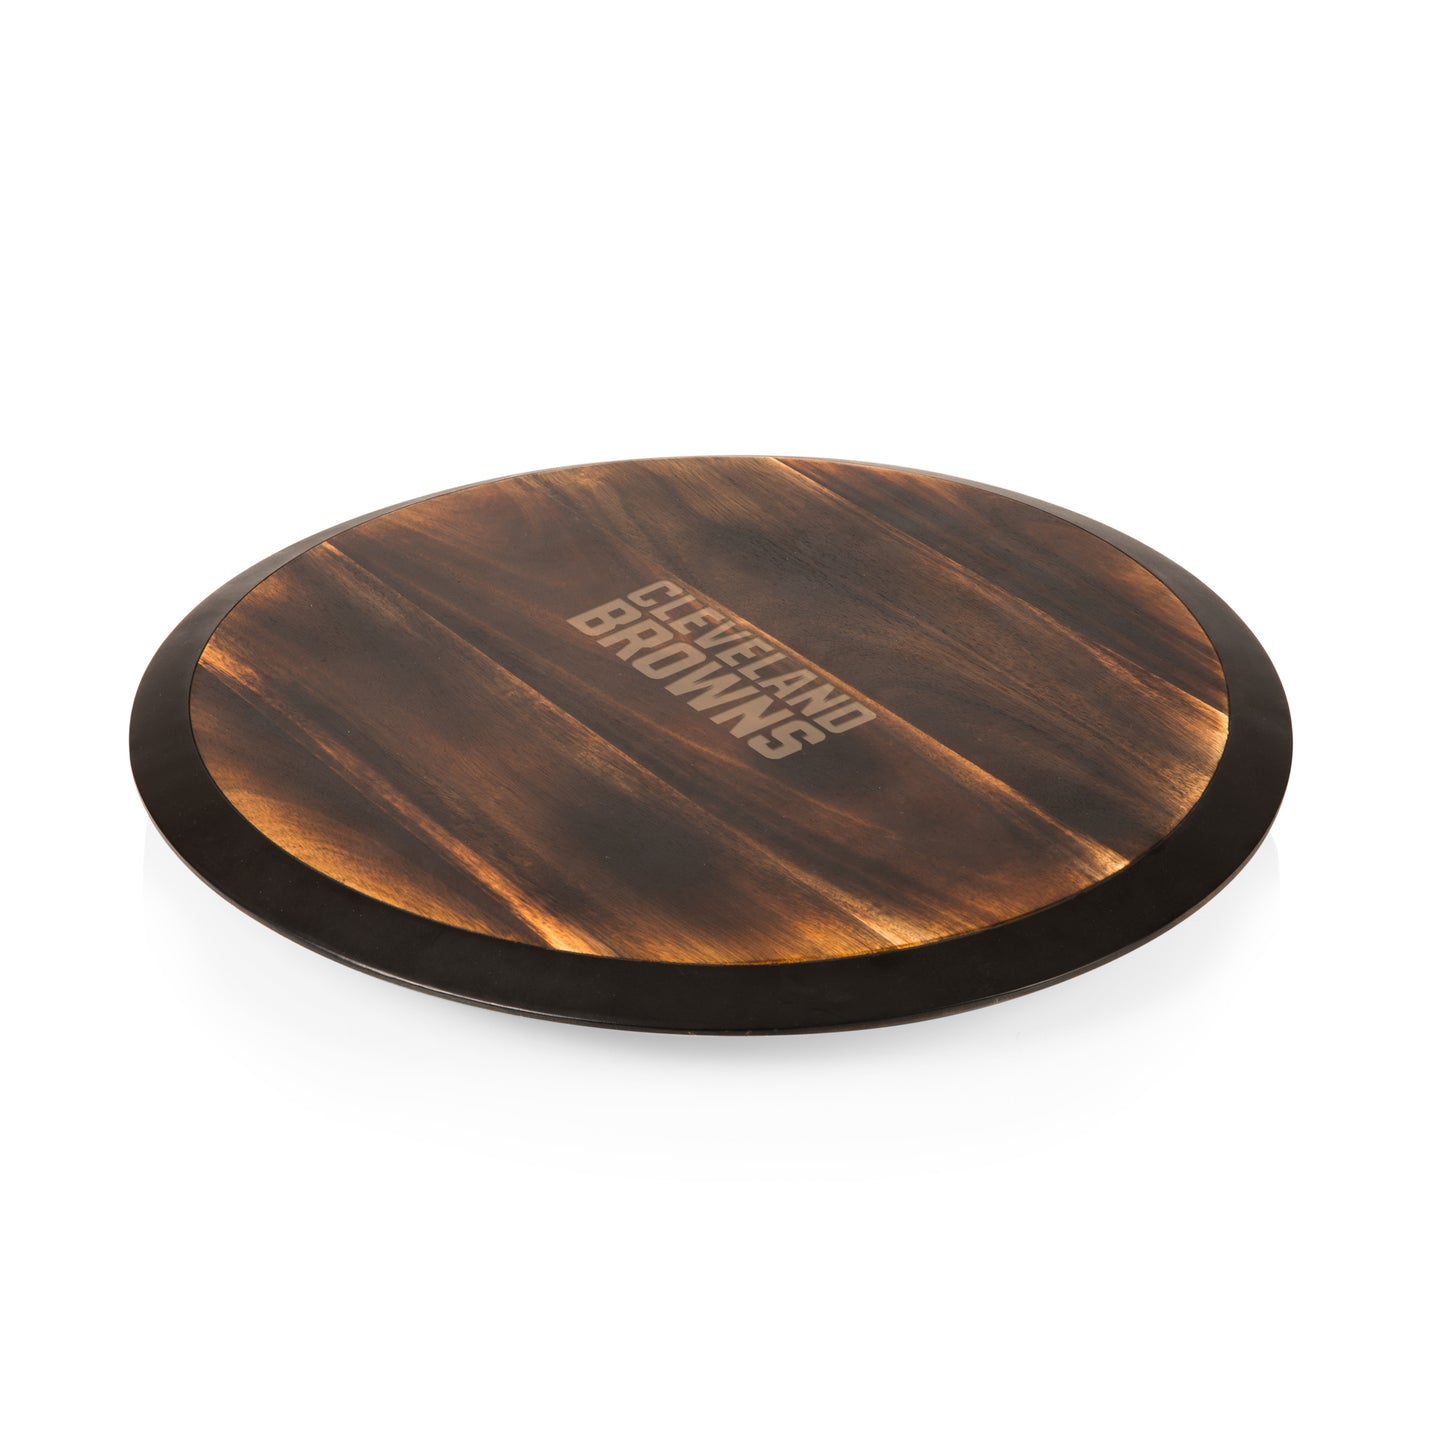 Cleveland Browns - Lazy Susan Serving Tray